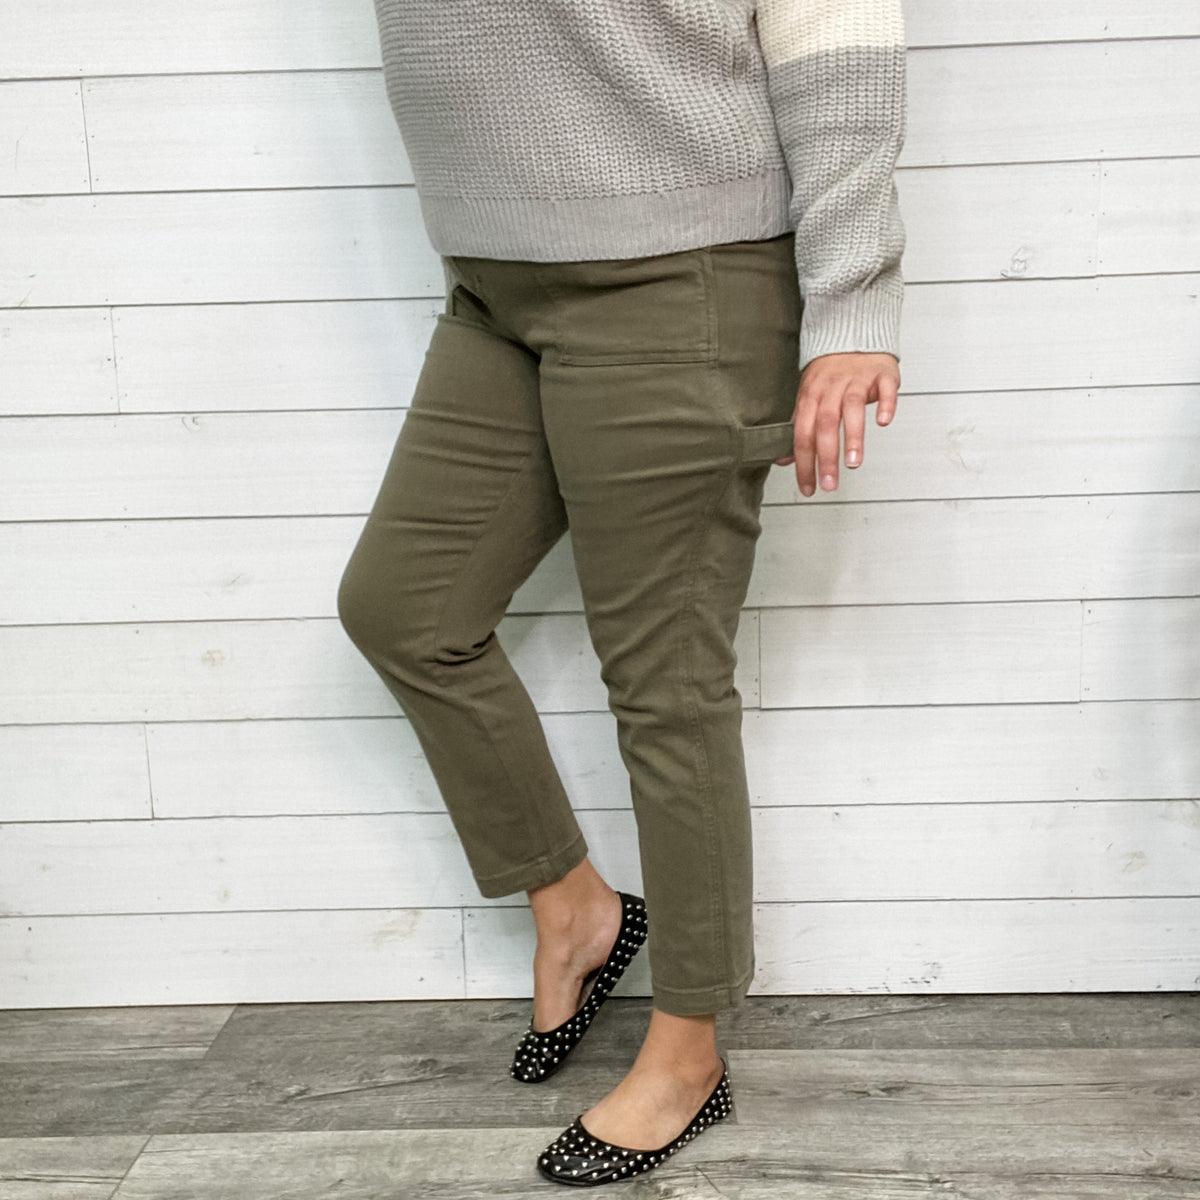 NWT Woman's A New Day Olive Green High Rise Skinny Ankle Pants (Size 18) E.